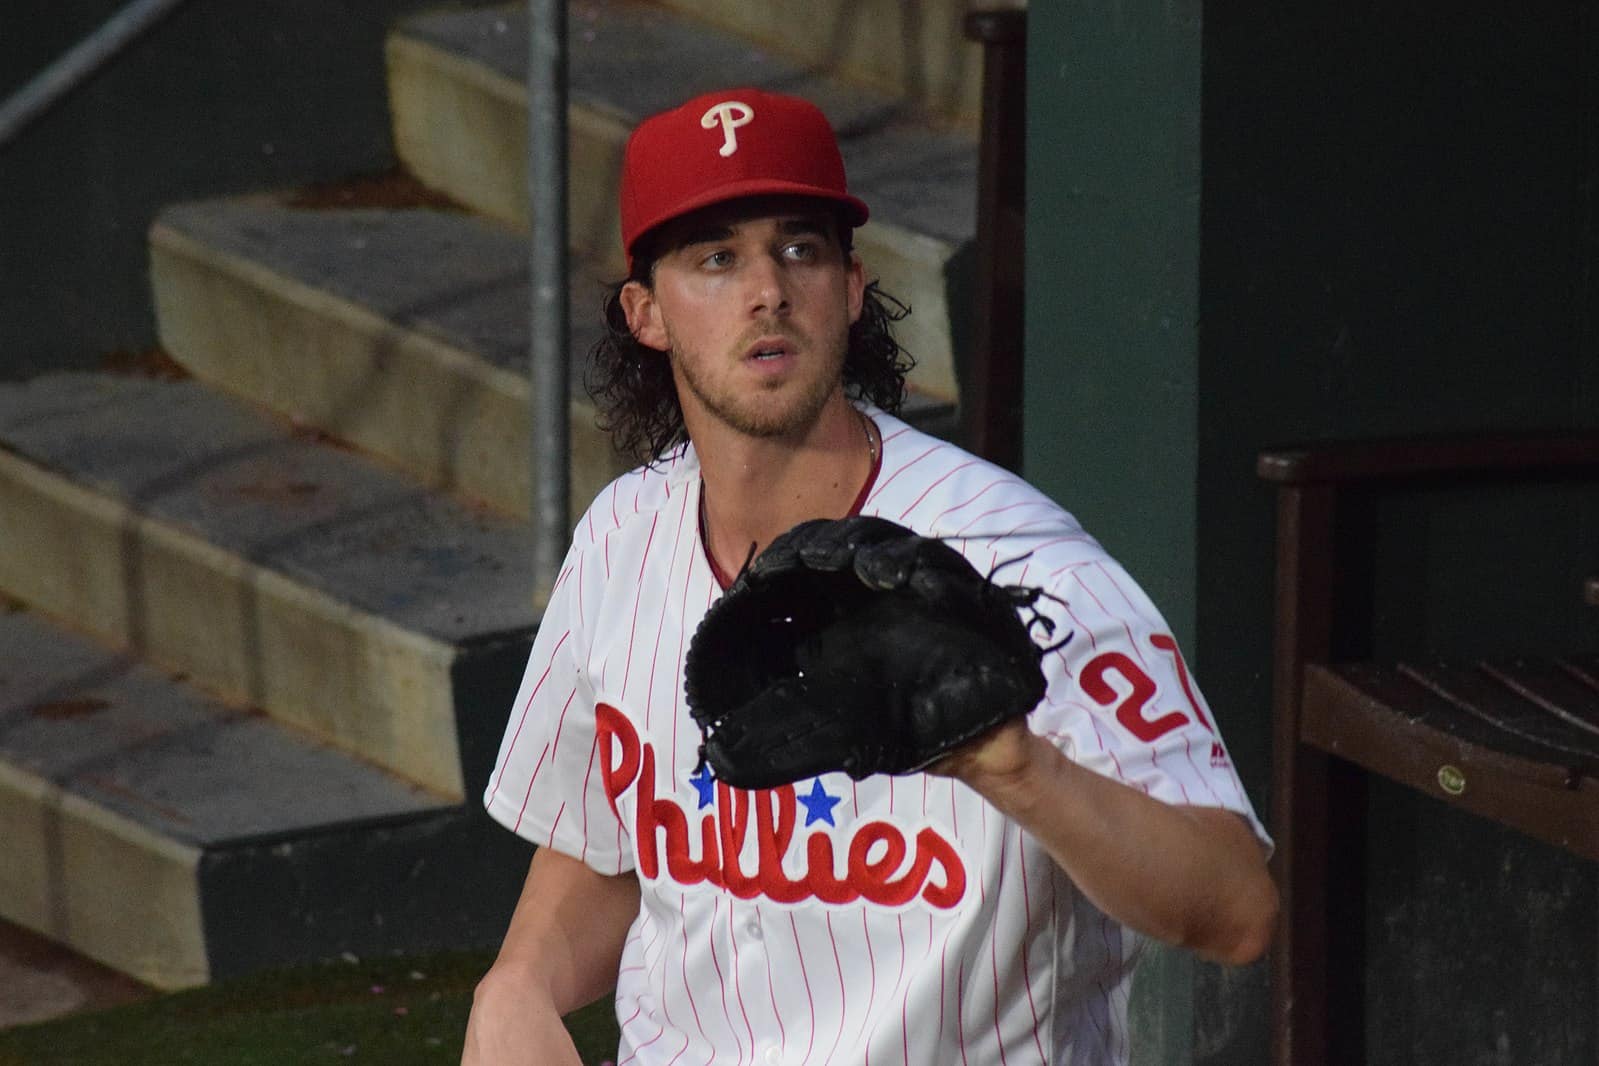 Phillies Aaron Nola tied the knot in Georgia on New Year's Eve